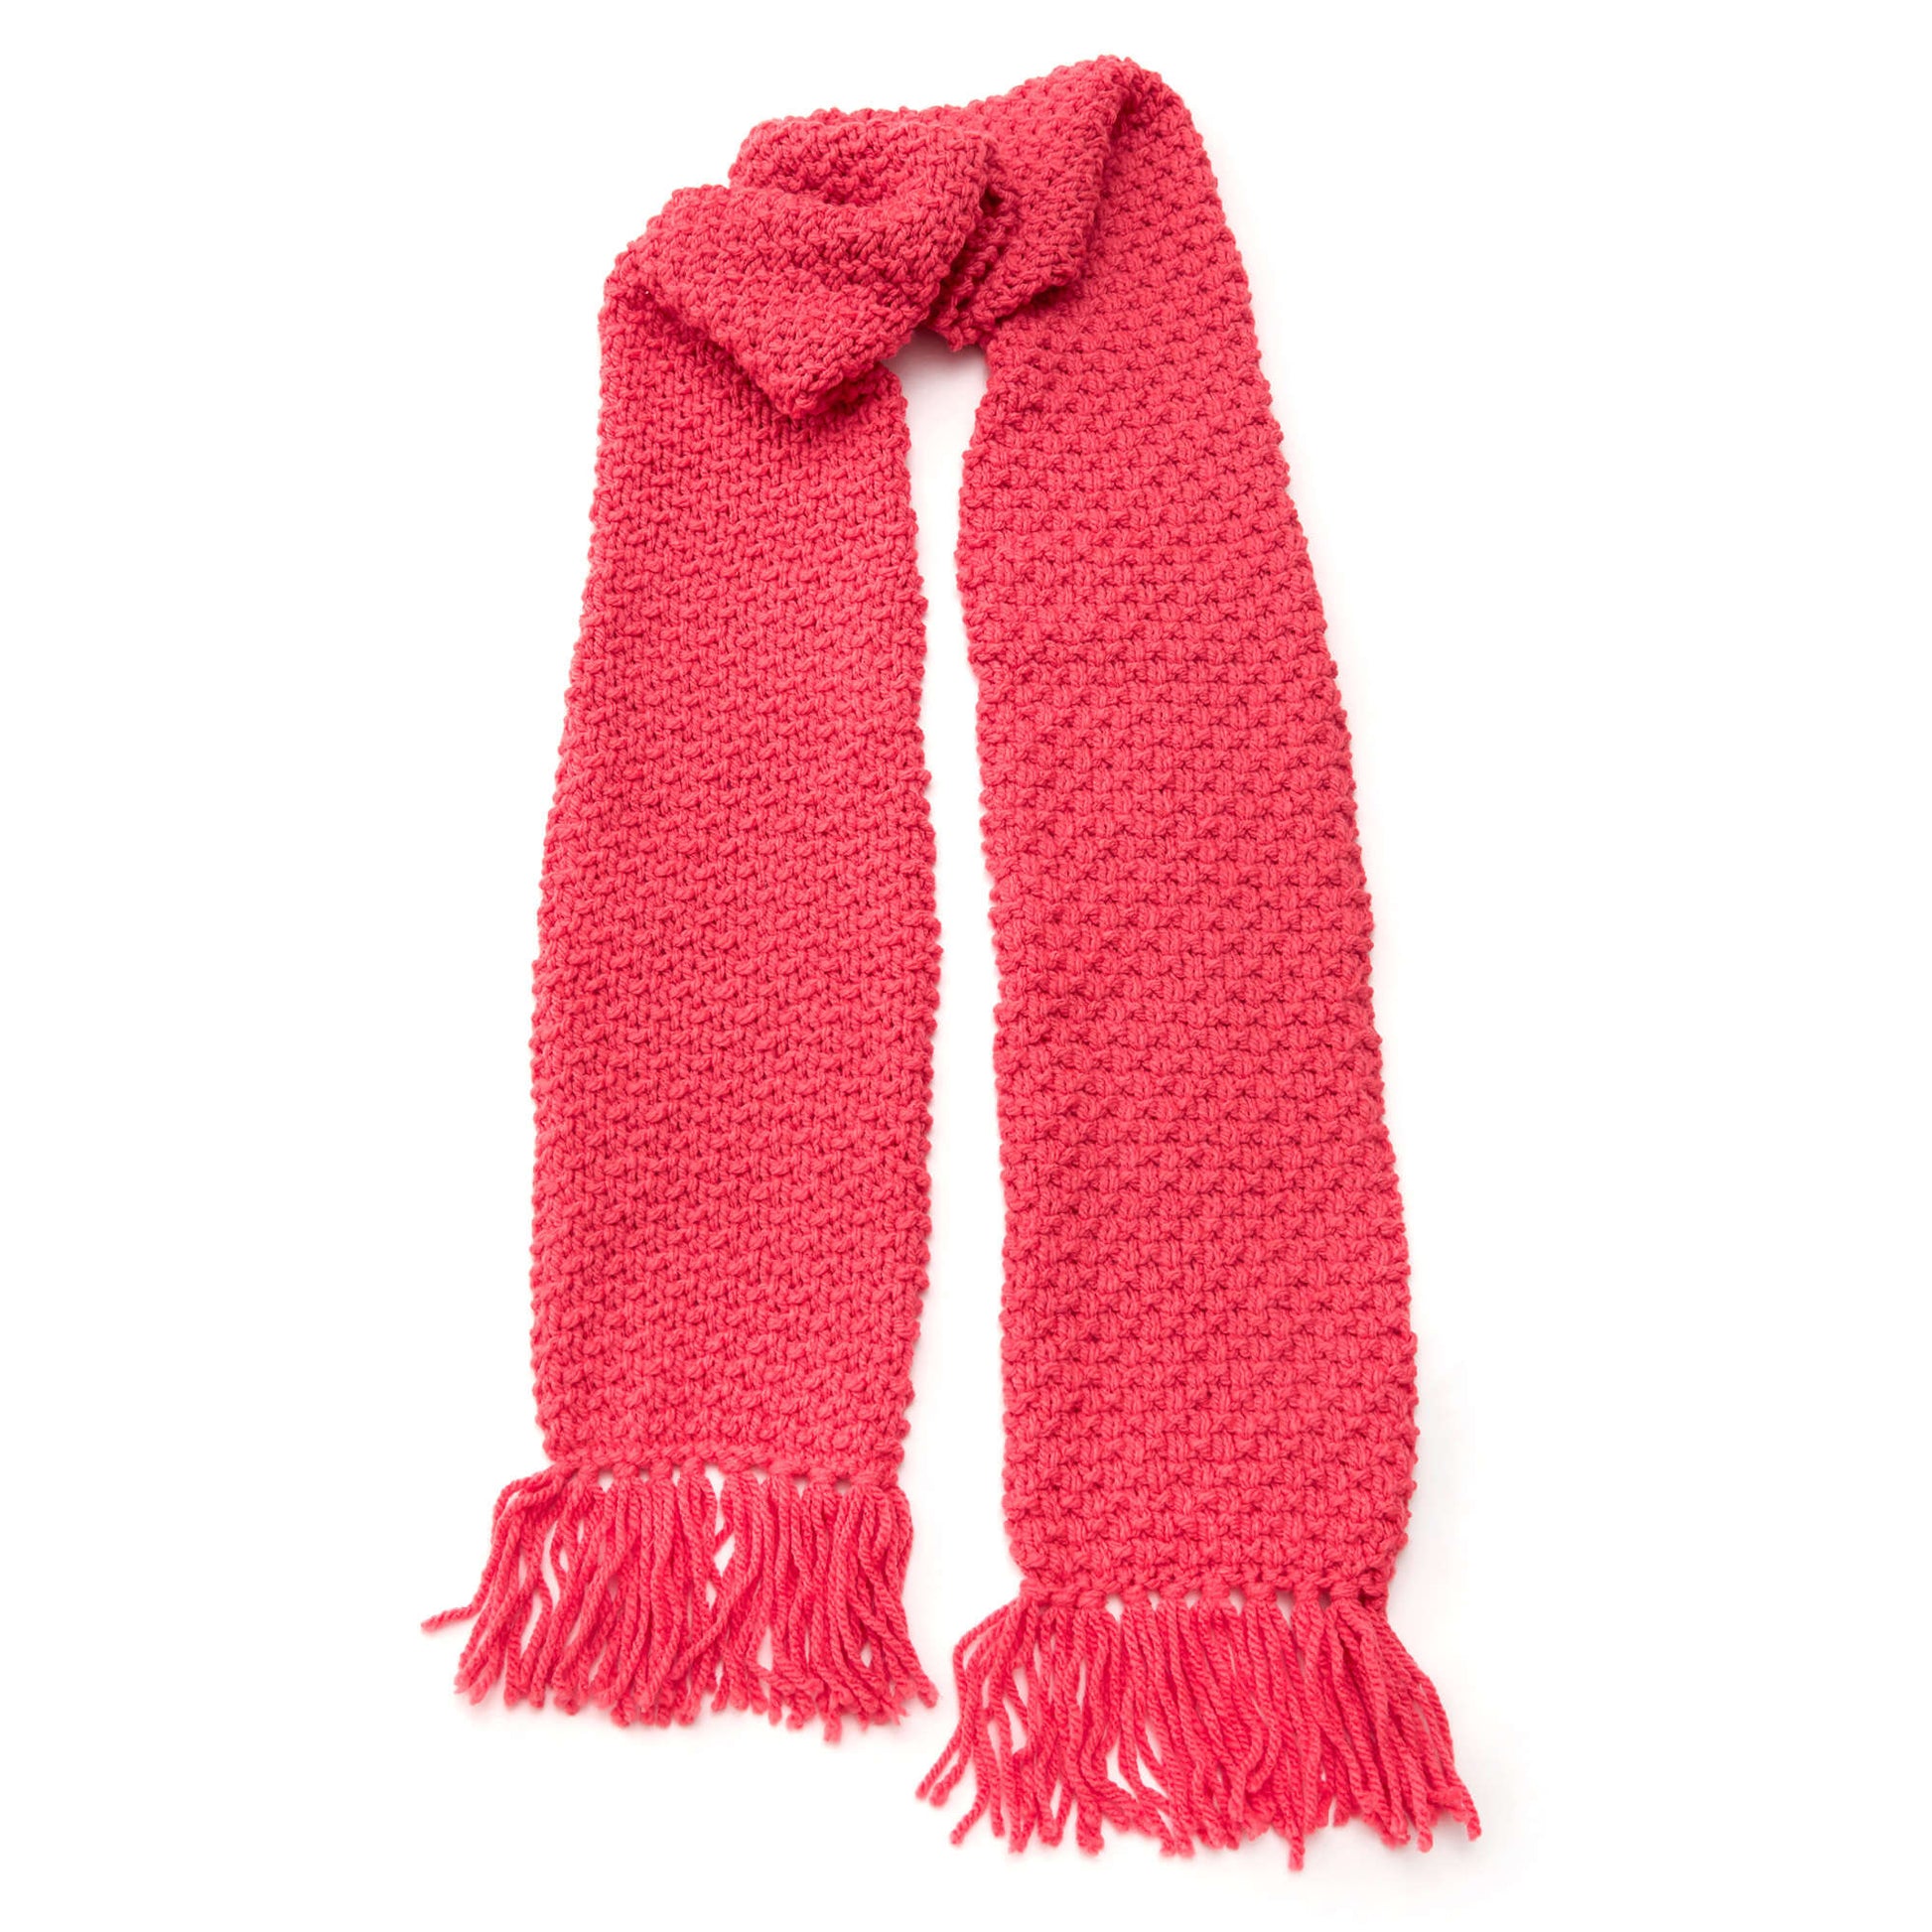 Free Red Heart Knit Textured Fringe Scarf Pattern